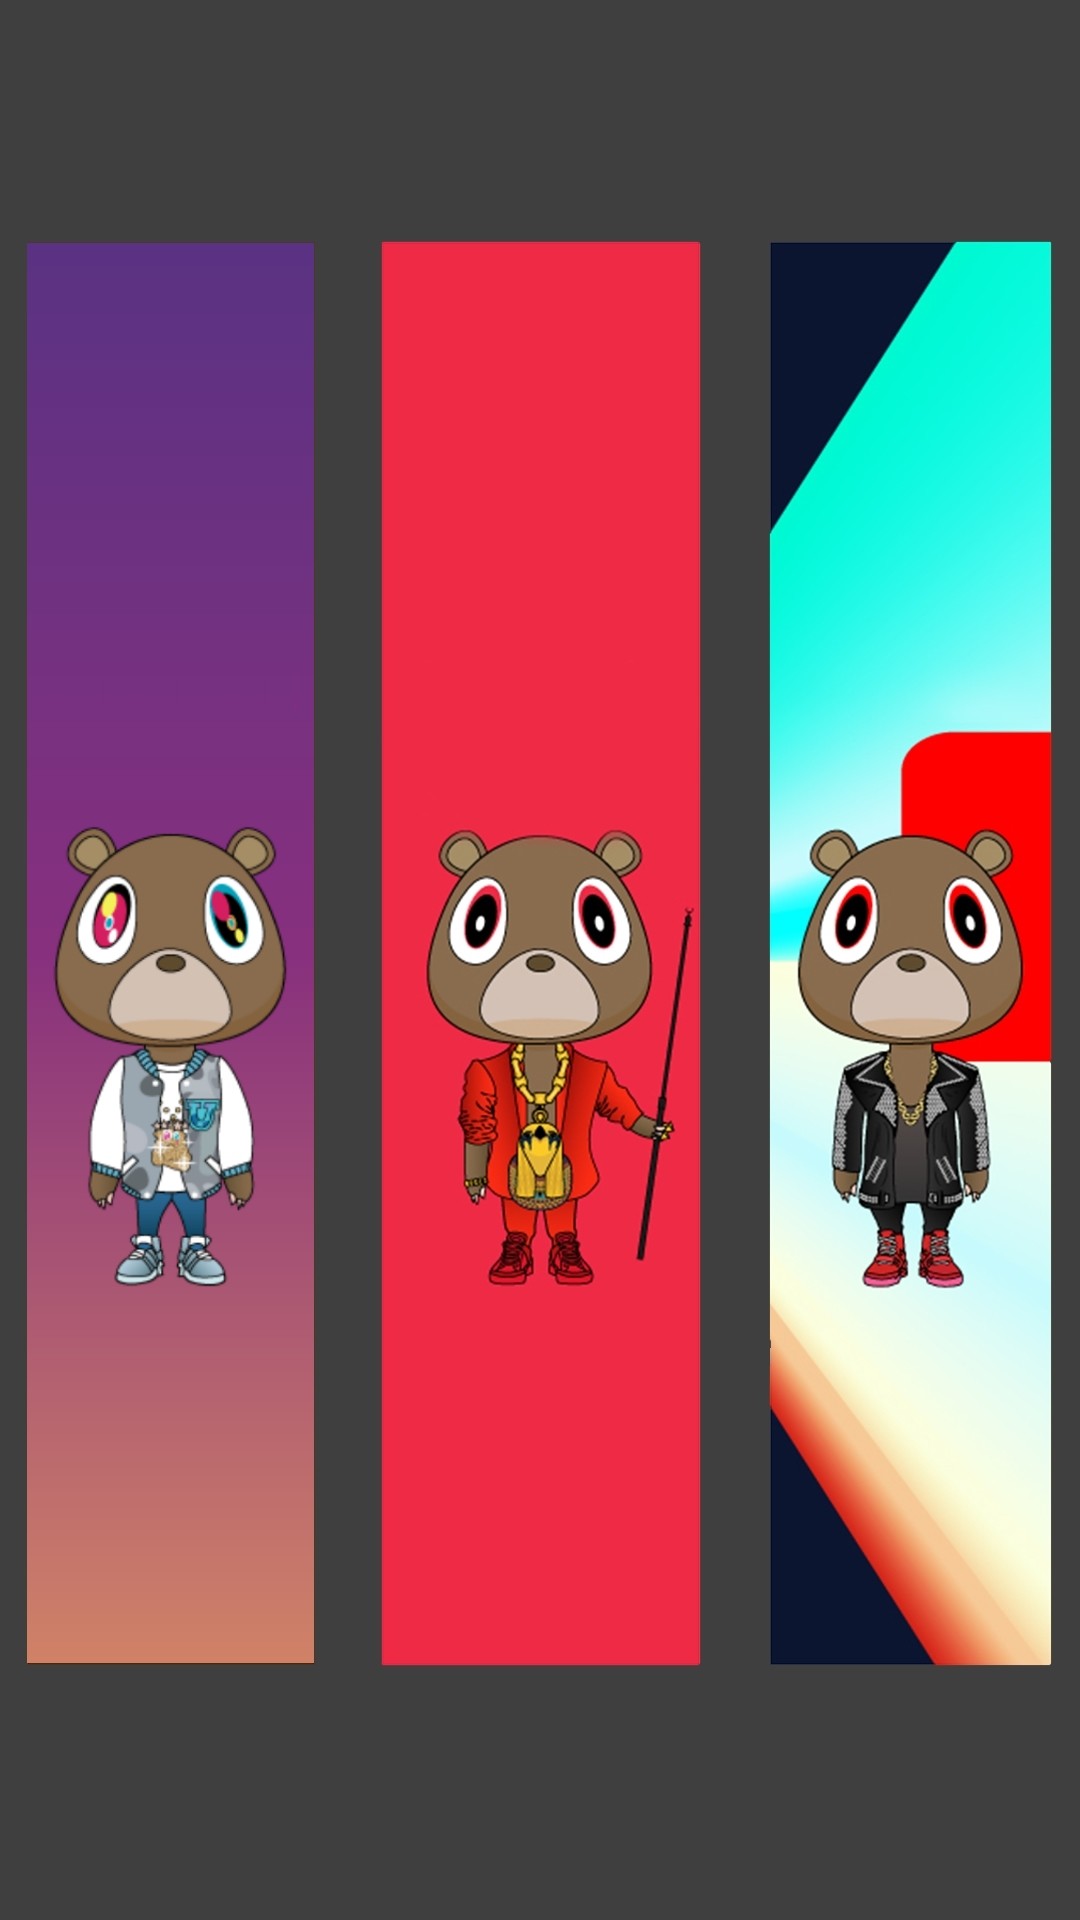 Modified I picture I saw on here into a phone wallpaper featuring my 3 favorite Yeezy albums